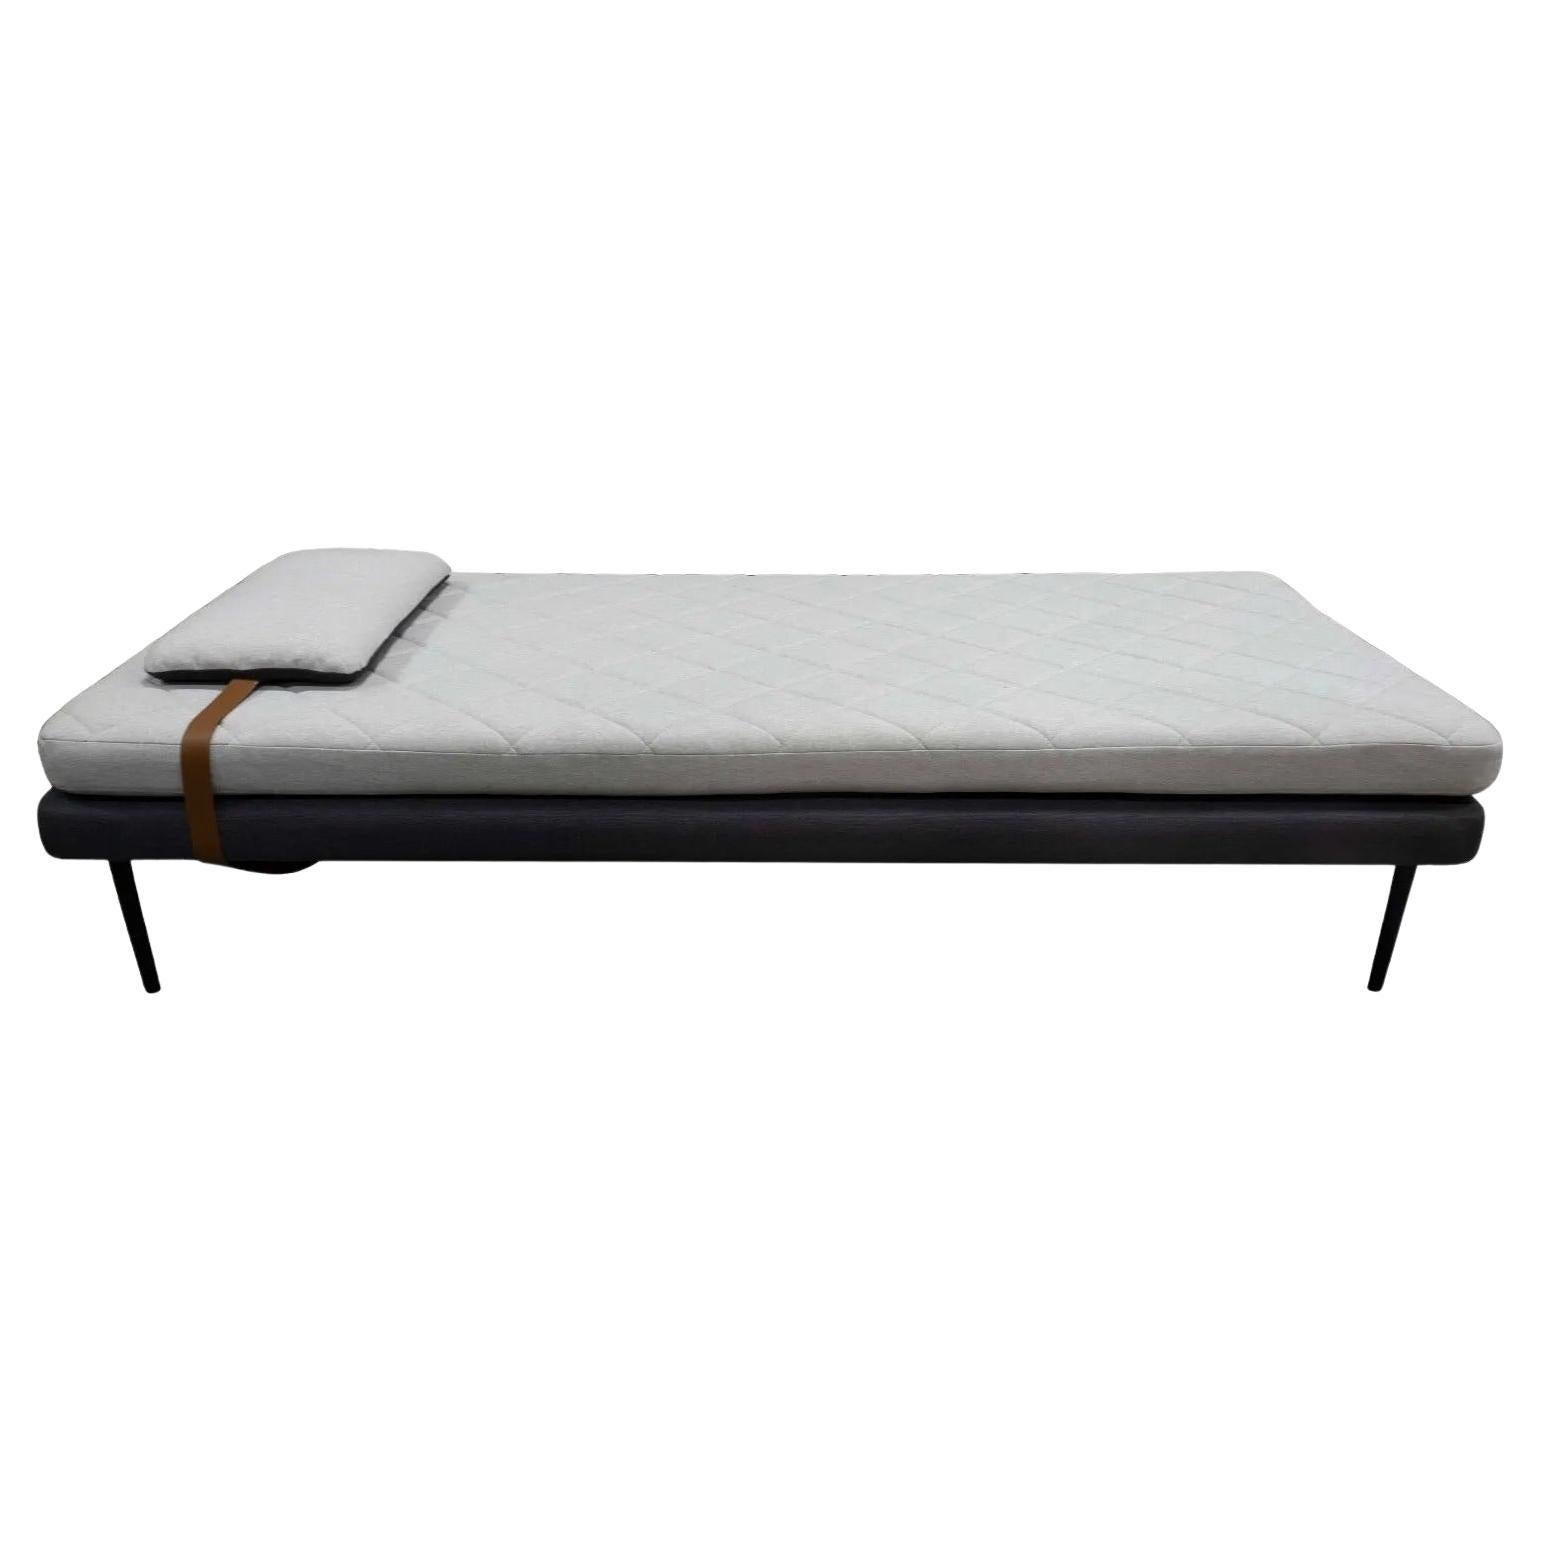 Contemporary Modern Light Grey Daybed with Detachable Pillow with Leather Straps For Sale